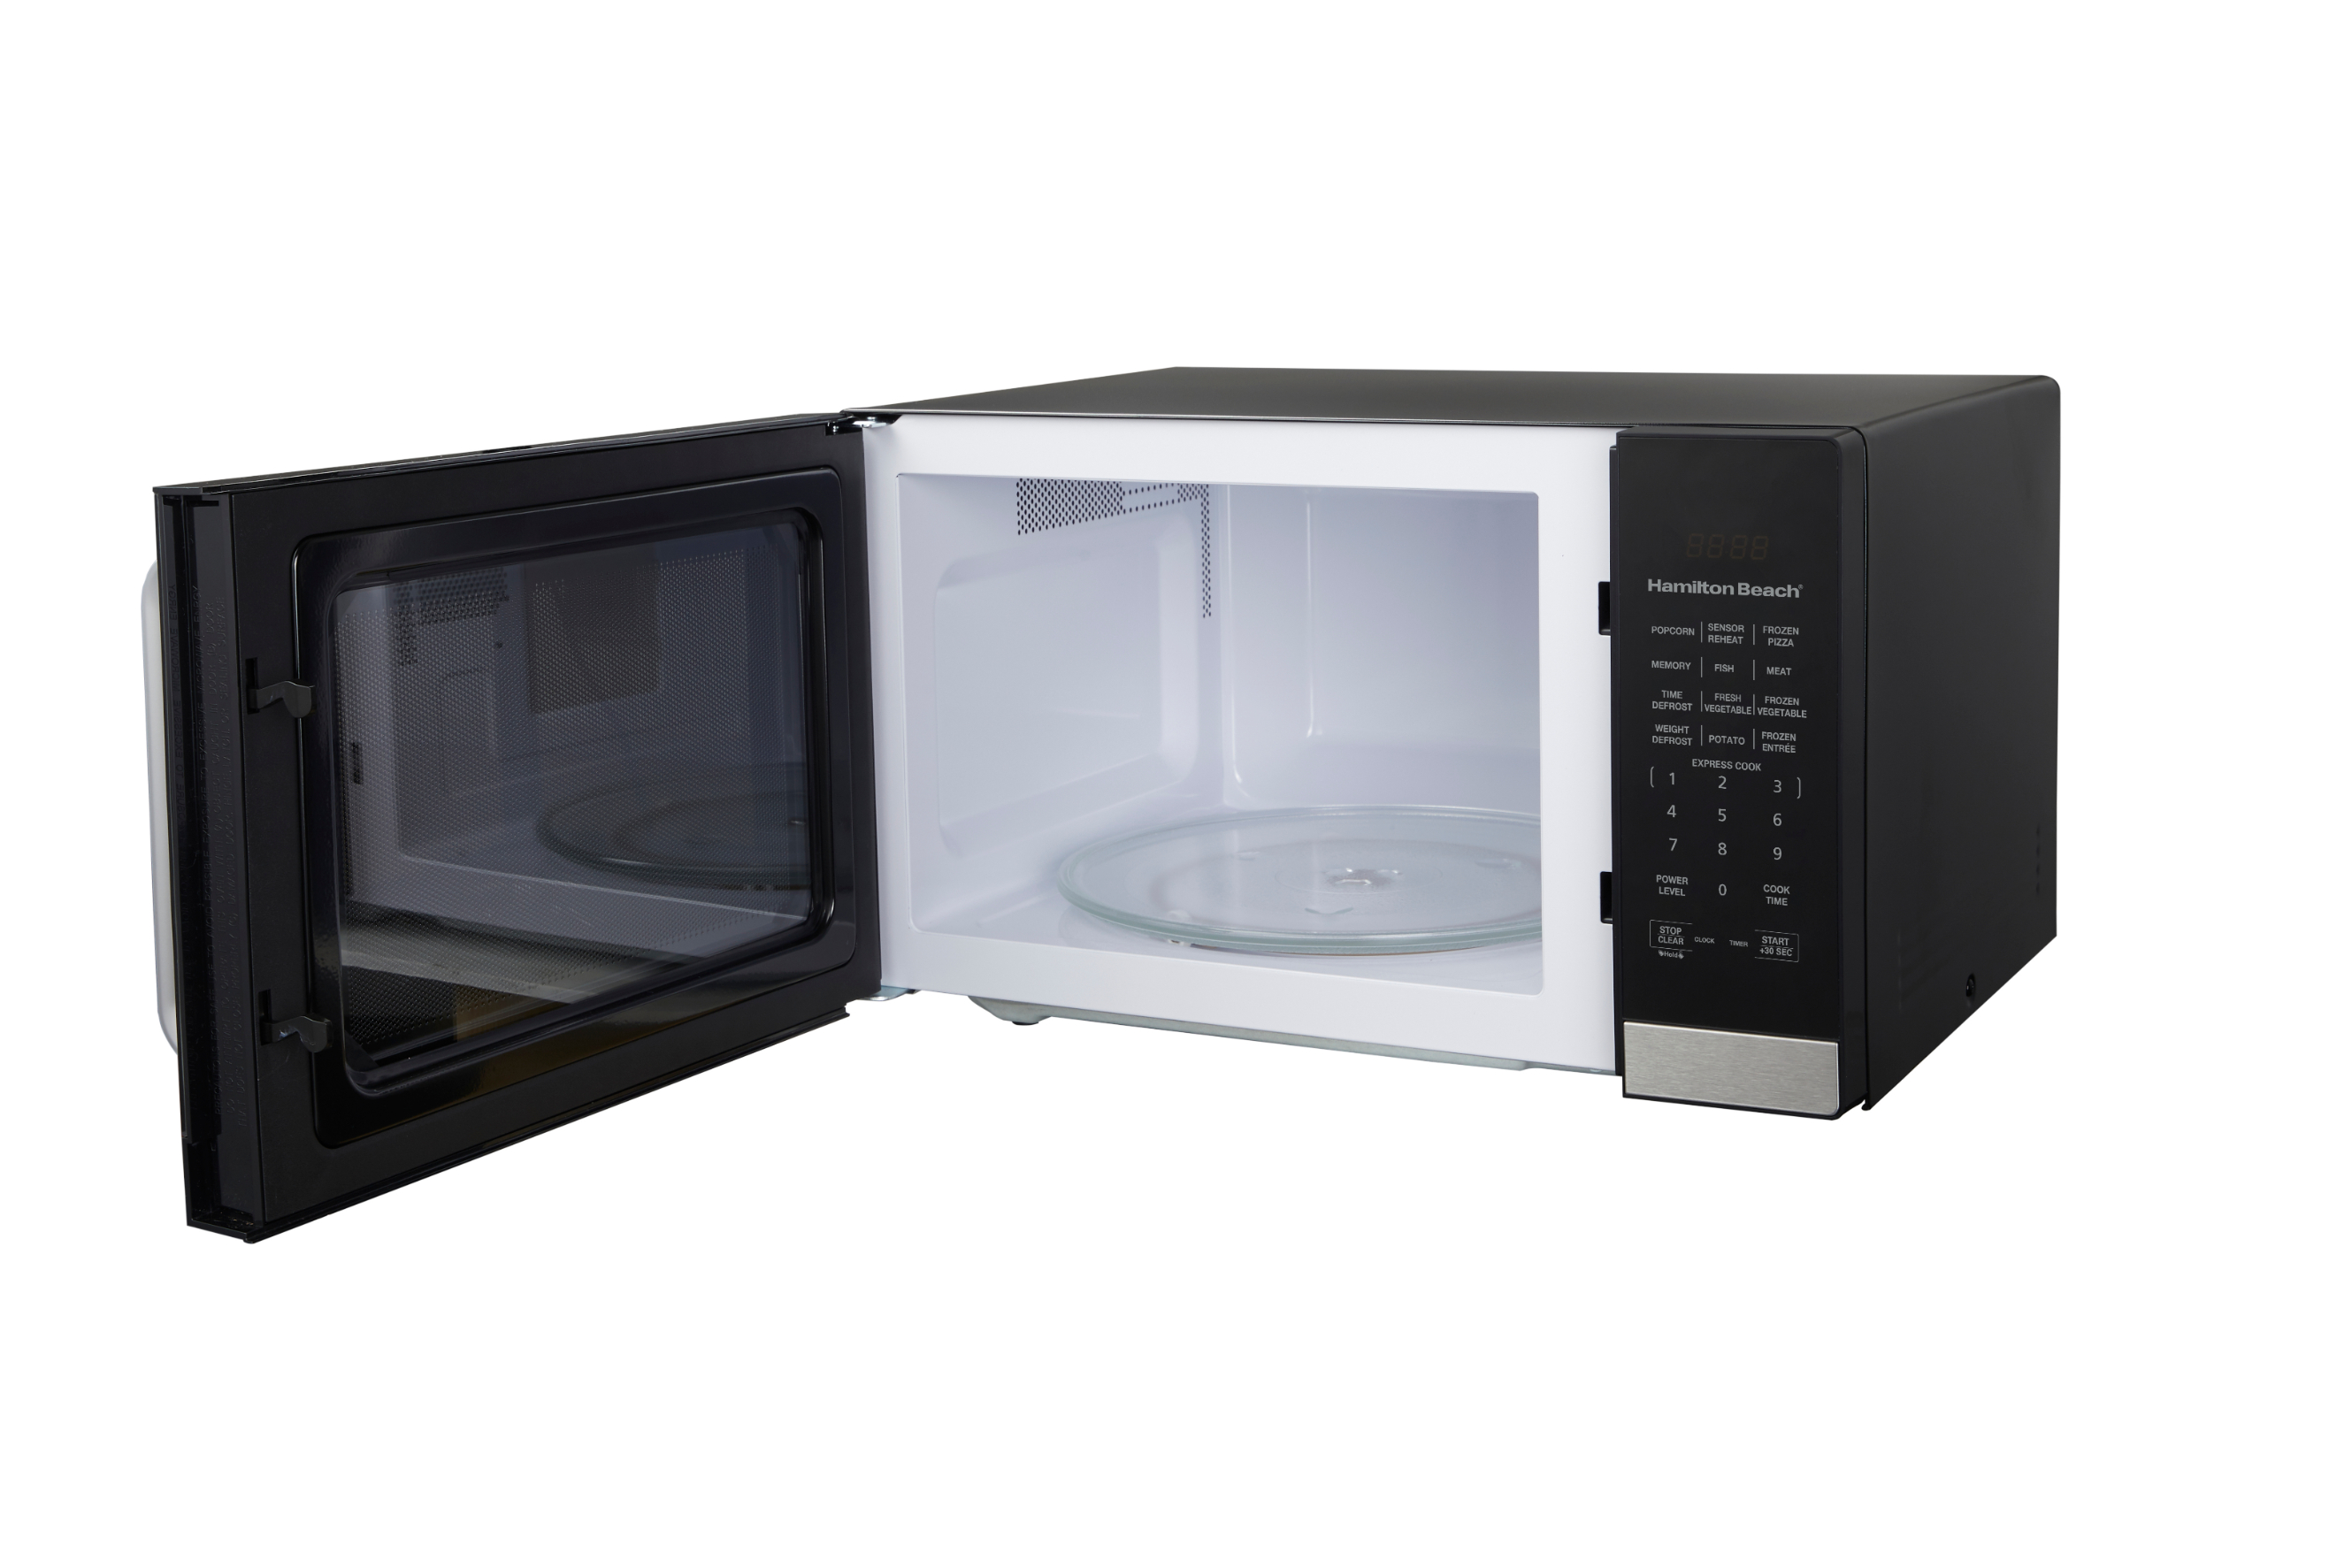 Hamilton Beach 1.4 Cu.ft. Microwave Oven, Stainless Steel, with Sensor - image 5 of 6